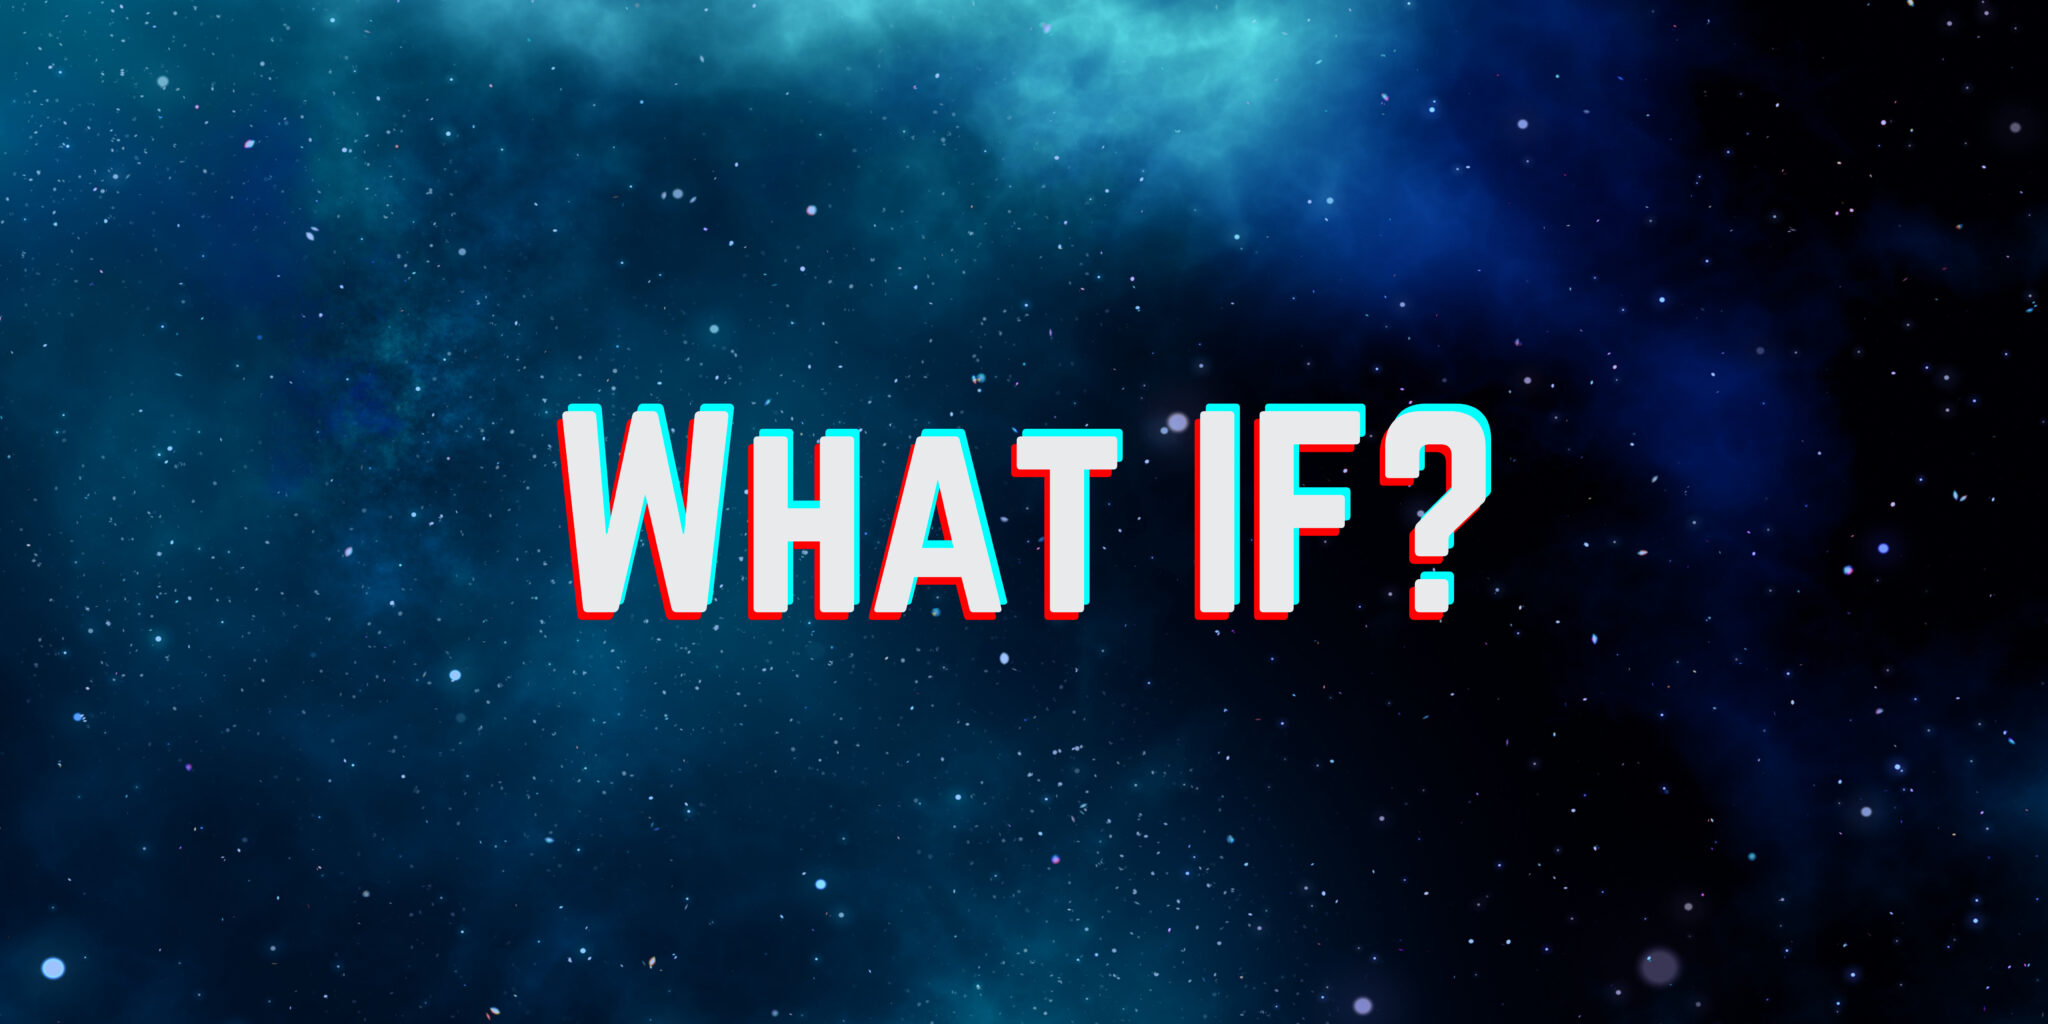 What if - featured Image